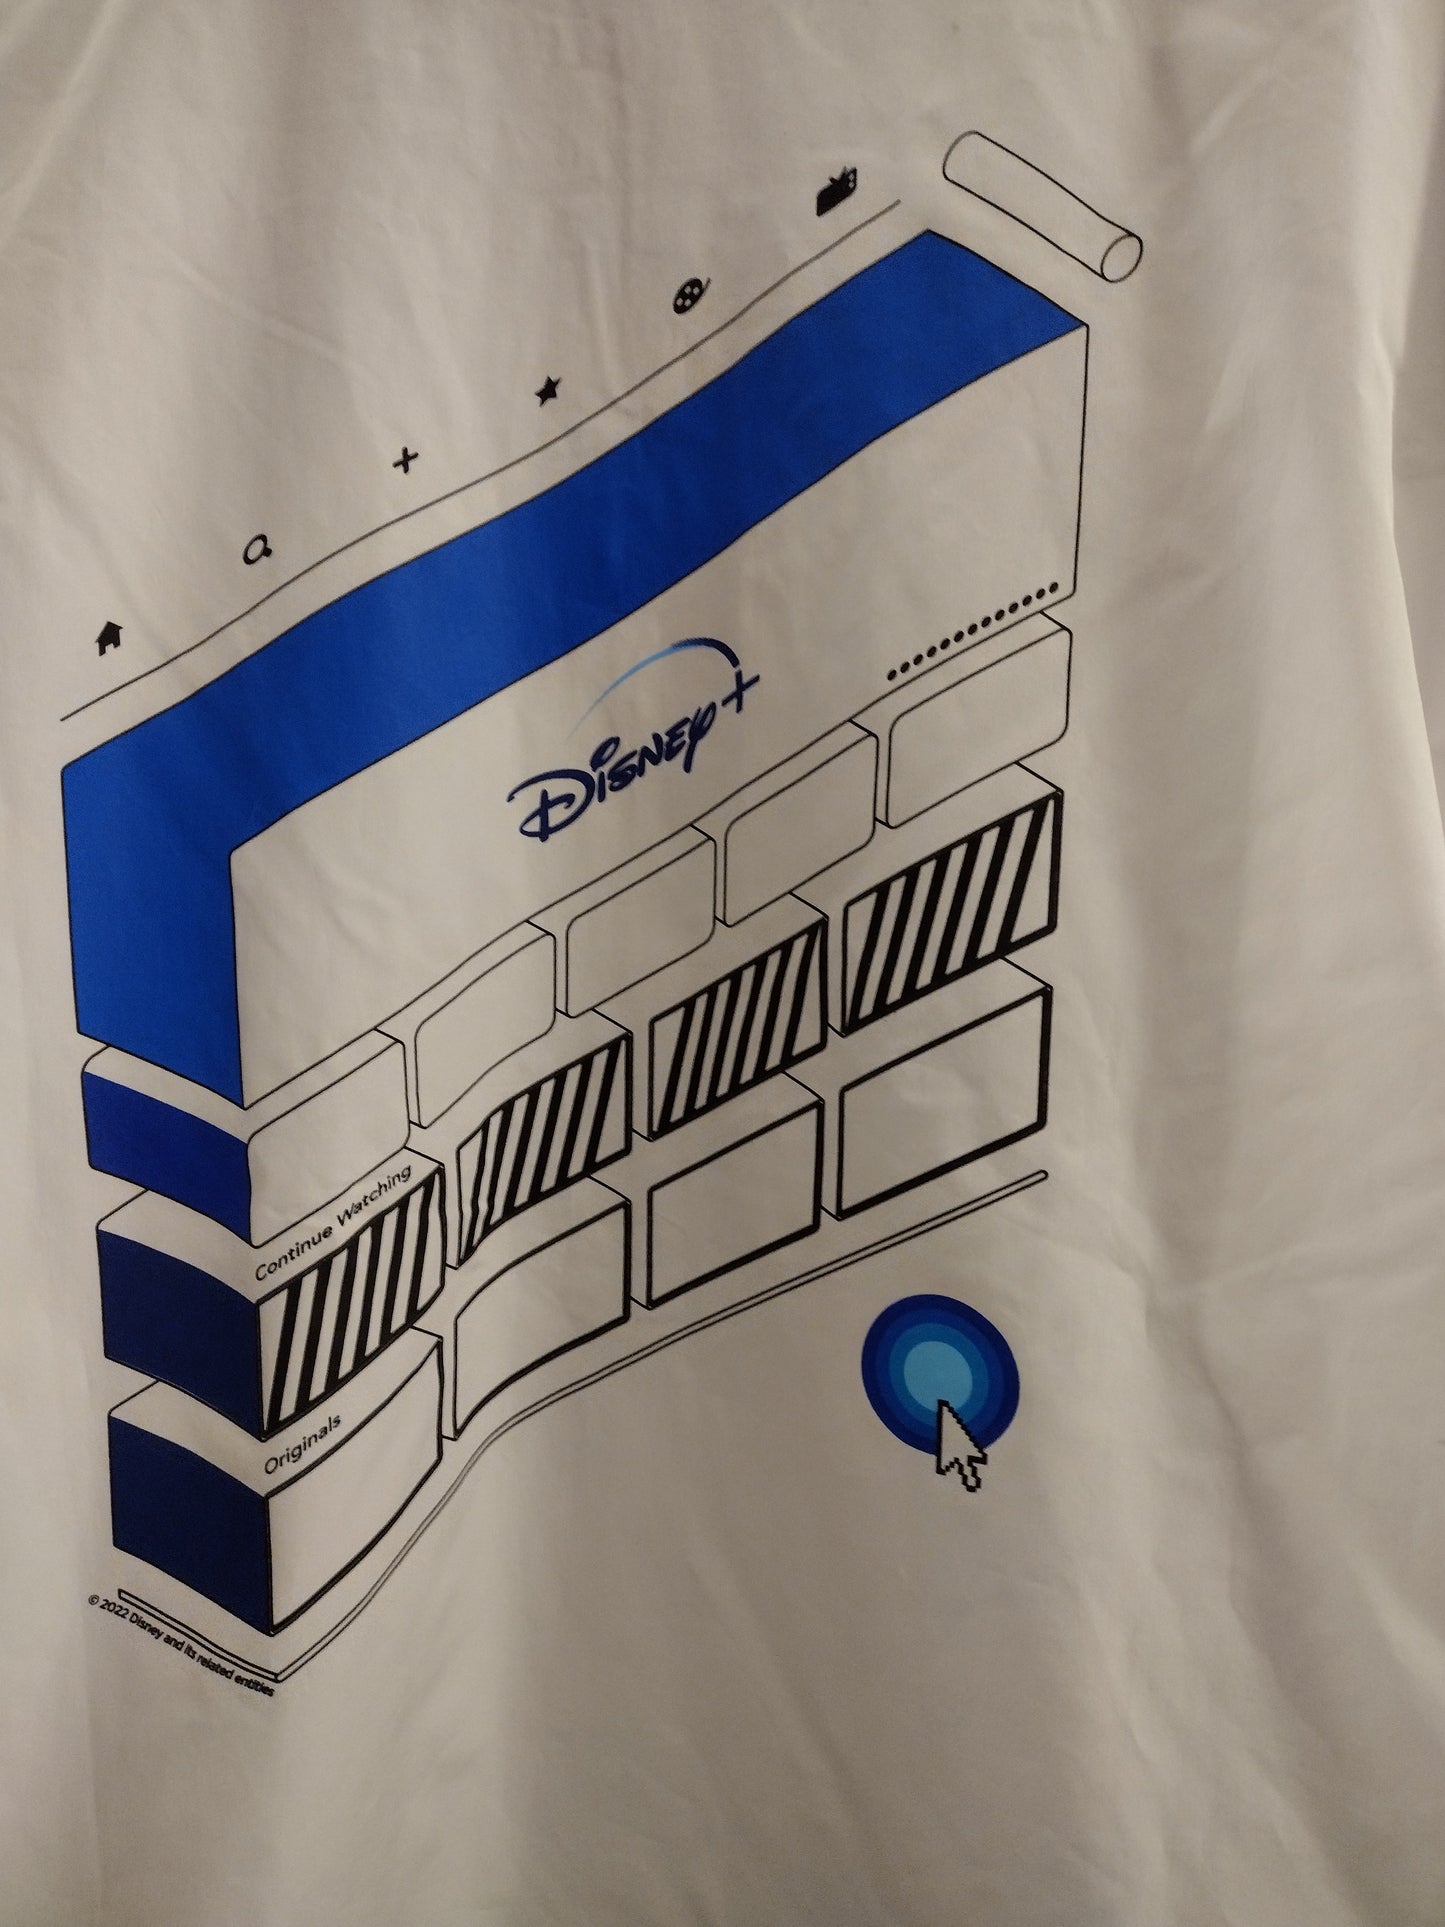 SDCC 2022 Exclusive Disney Plus Booth x Champion Packable Windbreaker